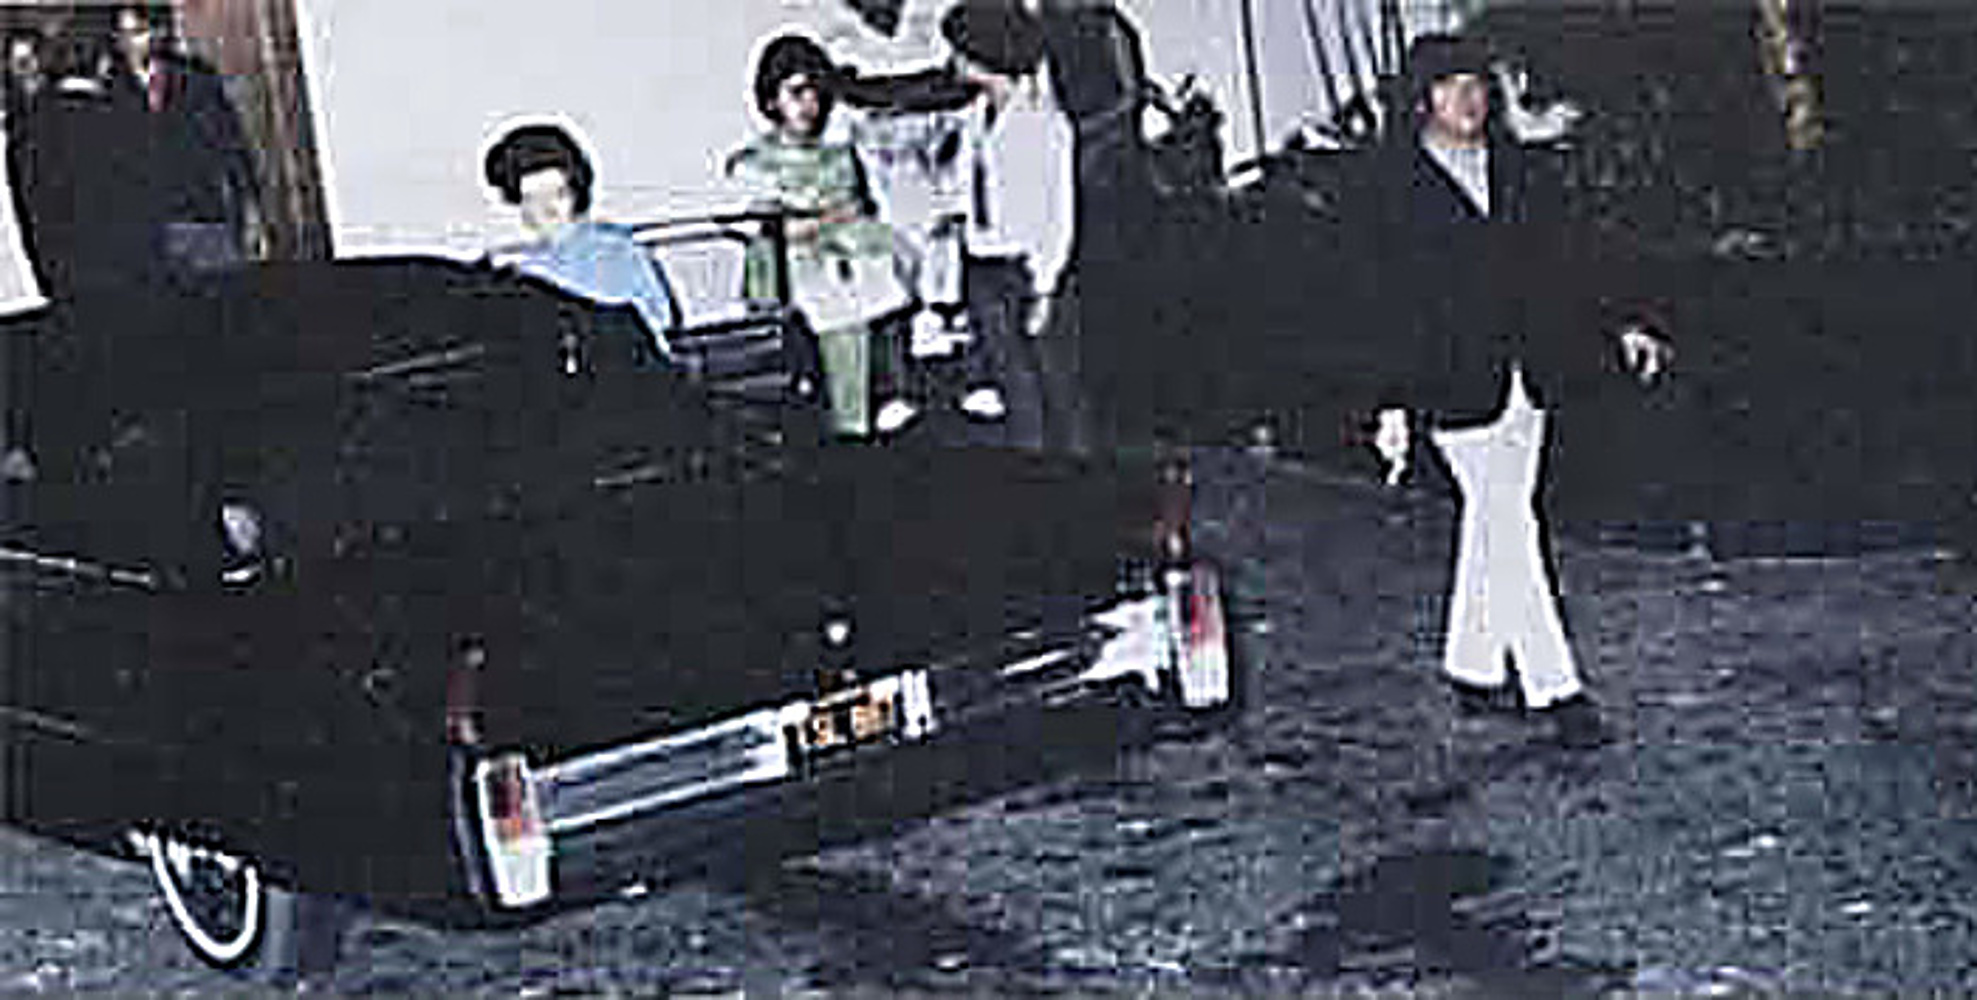 Elvis and Priscilla in the doorway at left, with John and George walking down the driveway / 28 August 1965